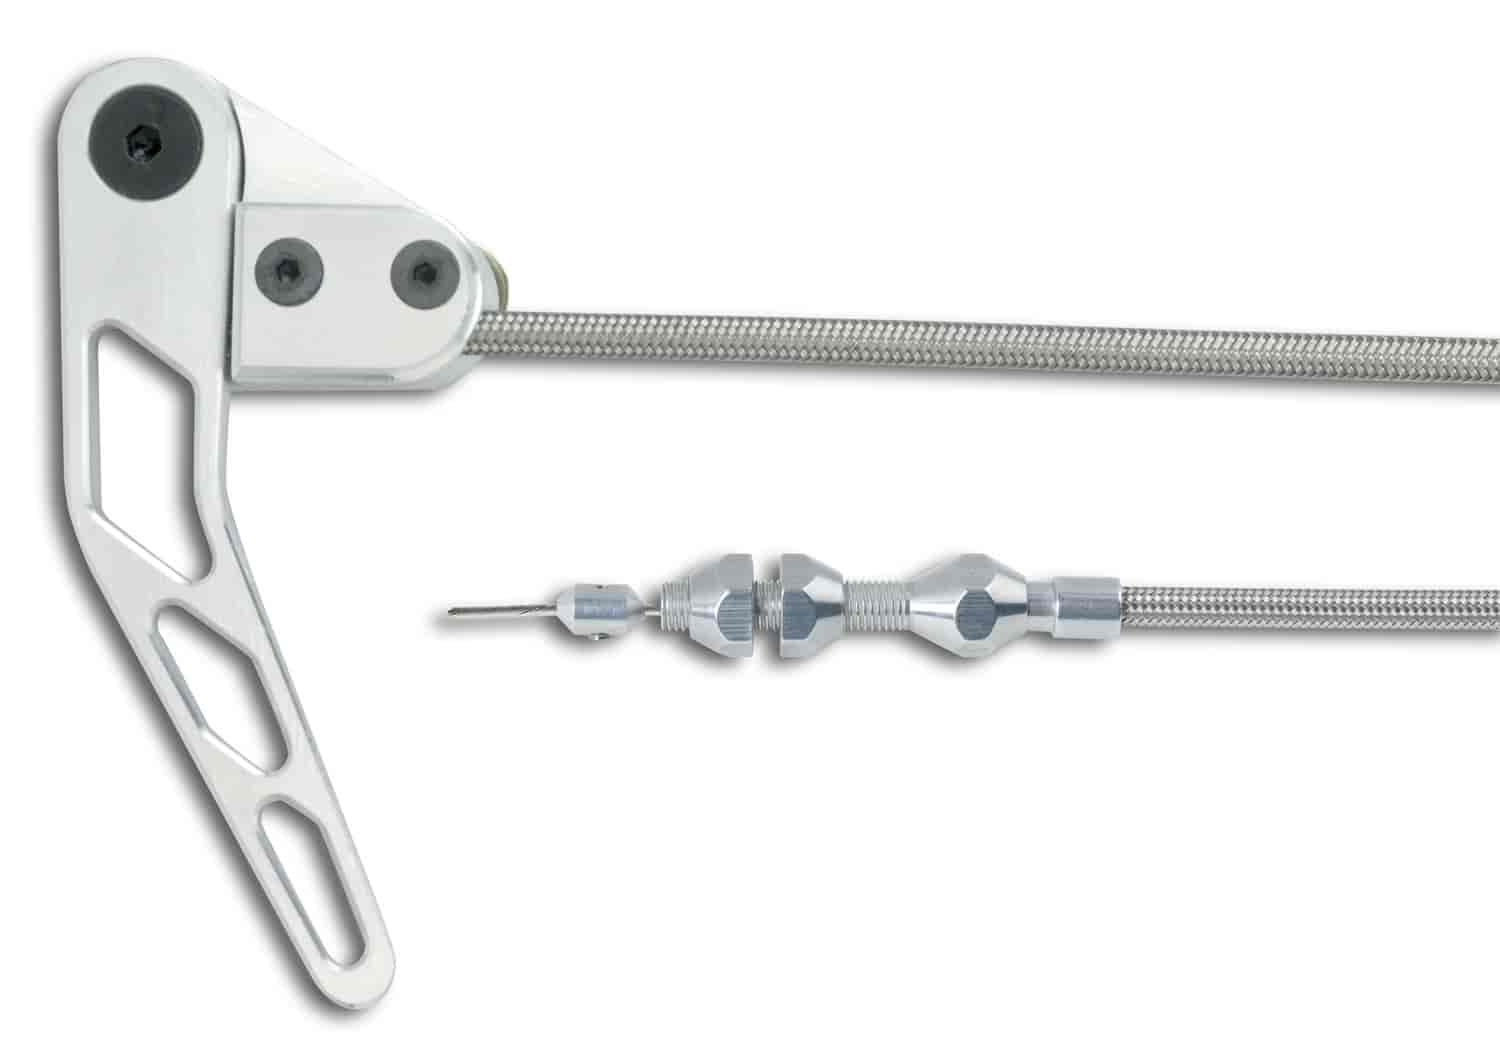 Hood Release Cable Kit Right Hand Stainless Steel Housing Incl. Cable Stop/15 Feet Of Outer Housing/16 Feet Inner Wire